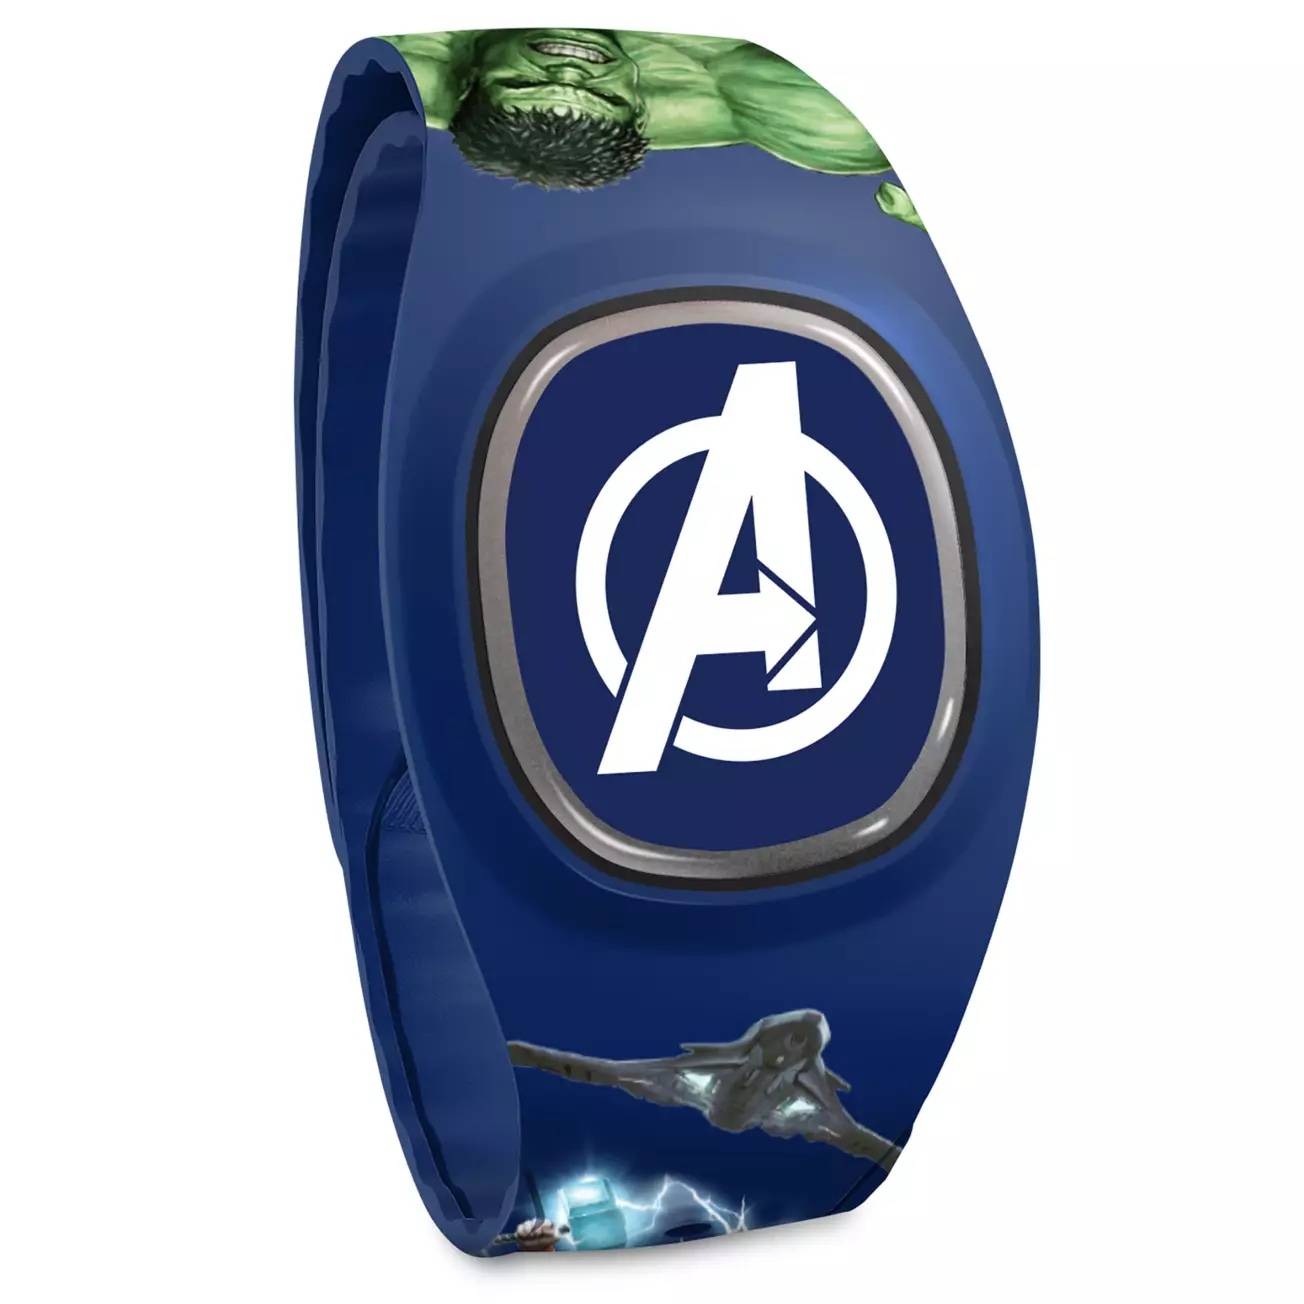 Disney adds new designs to its MagicBand+ line-up, including Guardians of the Galaxy and Main Street Electrical Parade